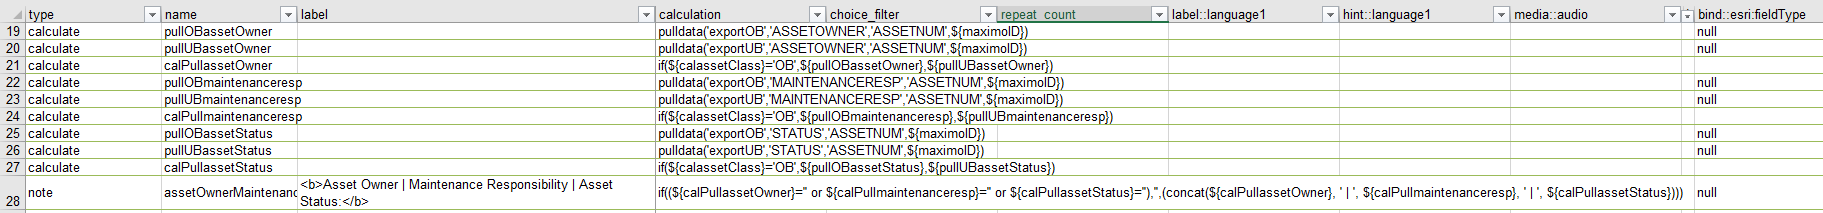 XLS form - pulldata not embeded in functions